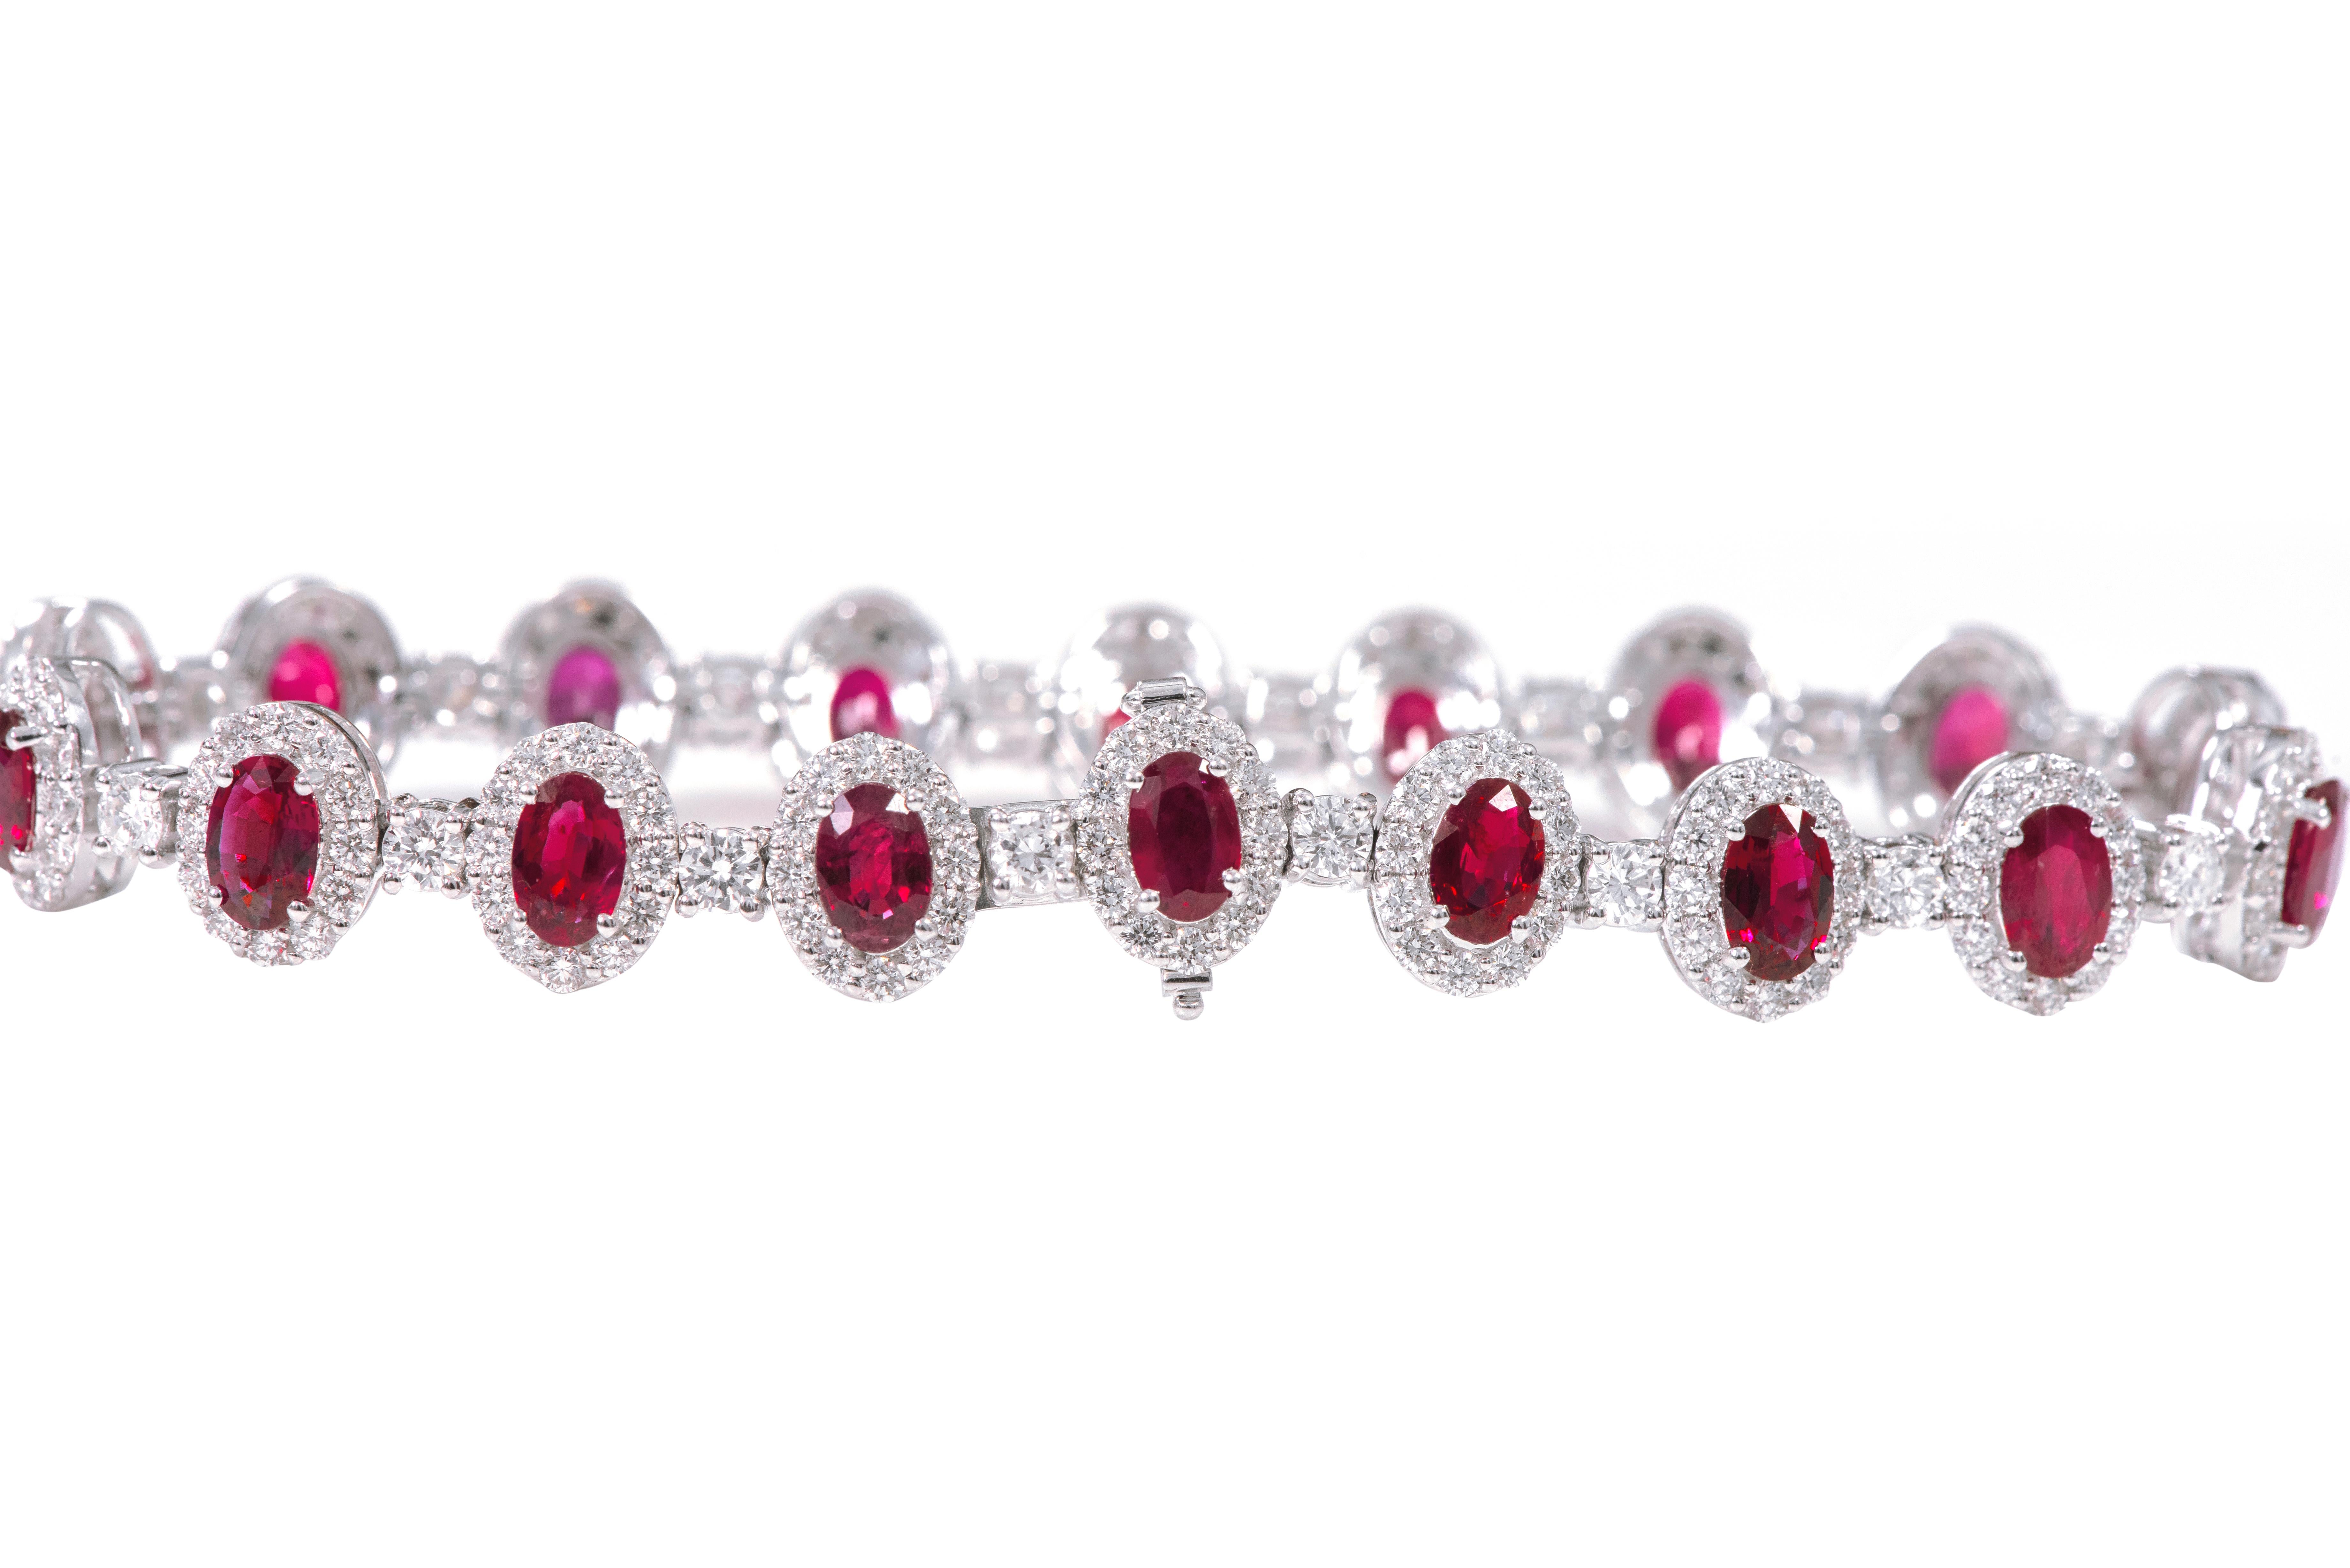 18 Karat White Gold 9.60 Carat Ruby and Diamond Cluster Modern Bracelet

This impressive deep red ruby and diamond tennis bracelet is remarkably brilliant. The solitaire oval rubies are magnificently surrounded with a layer of pave set round